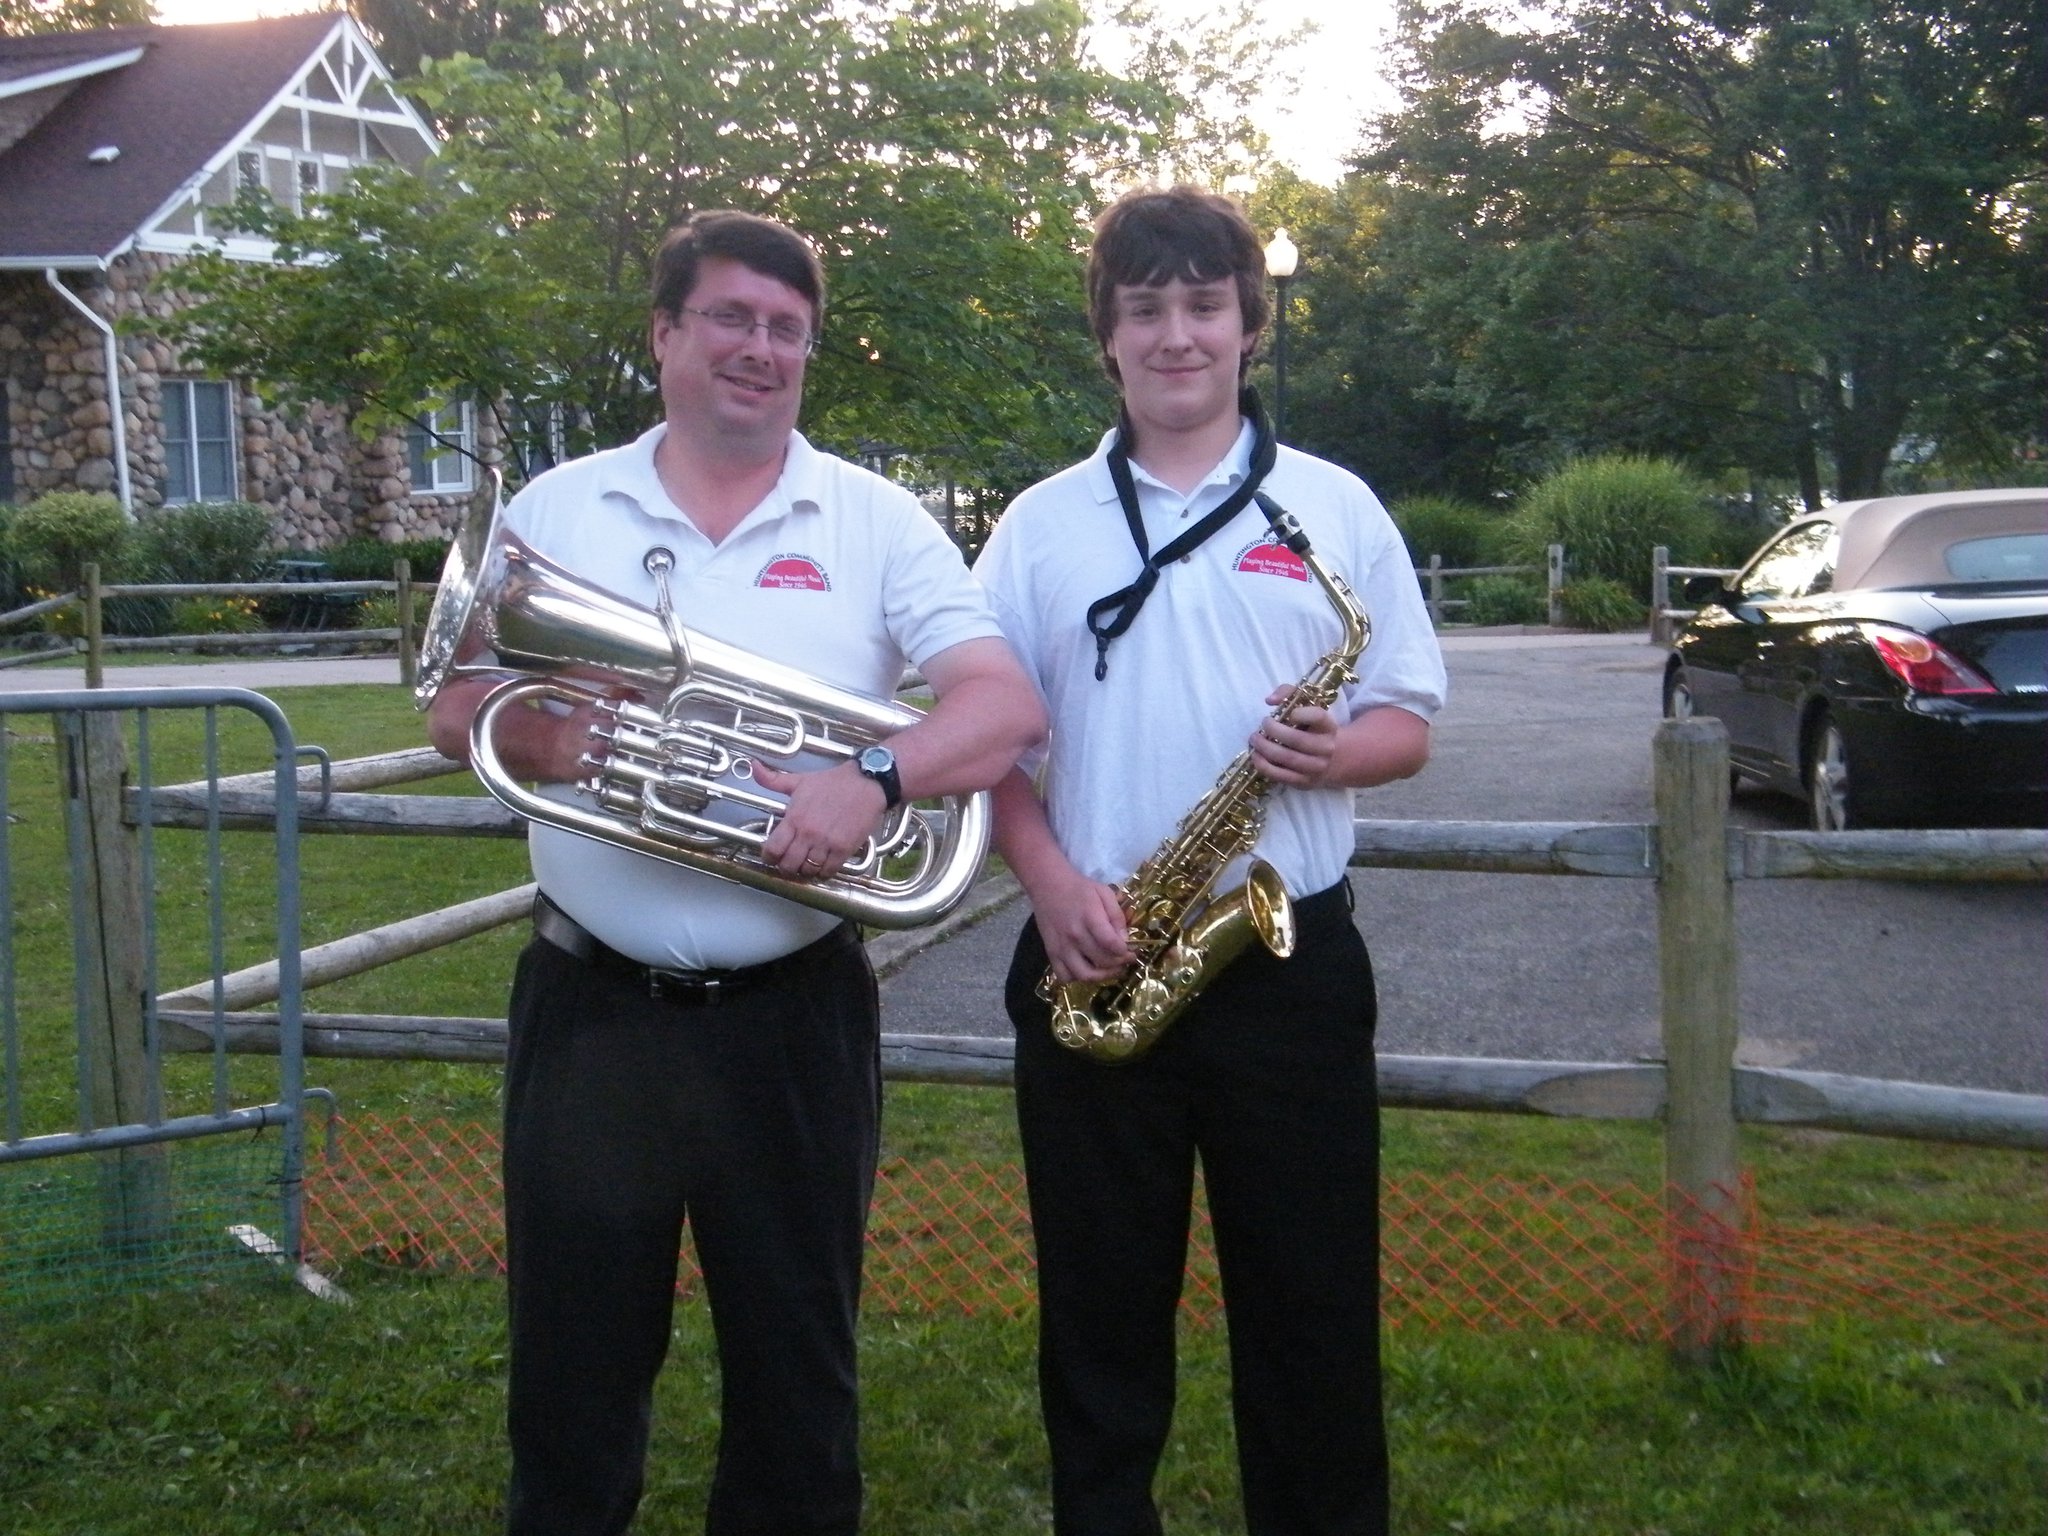 Mike Jensen and his son, Mack, pose with their musical instruments